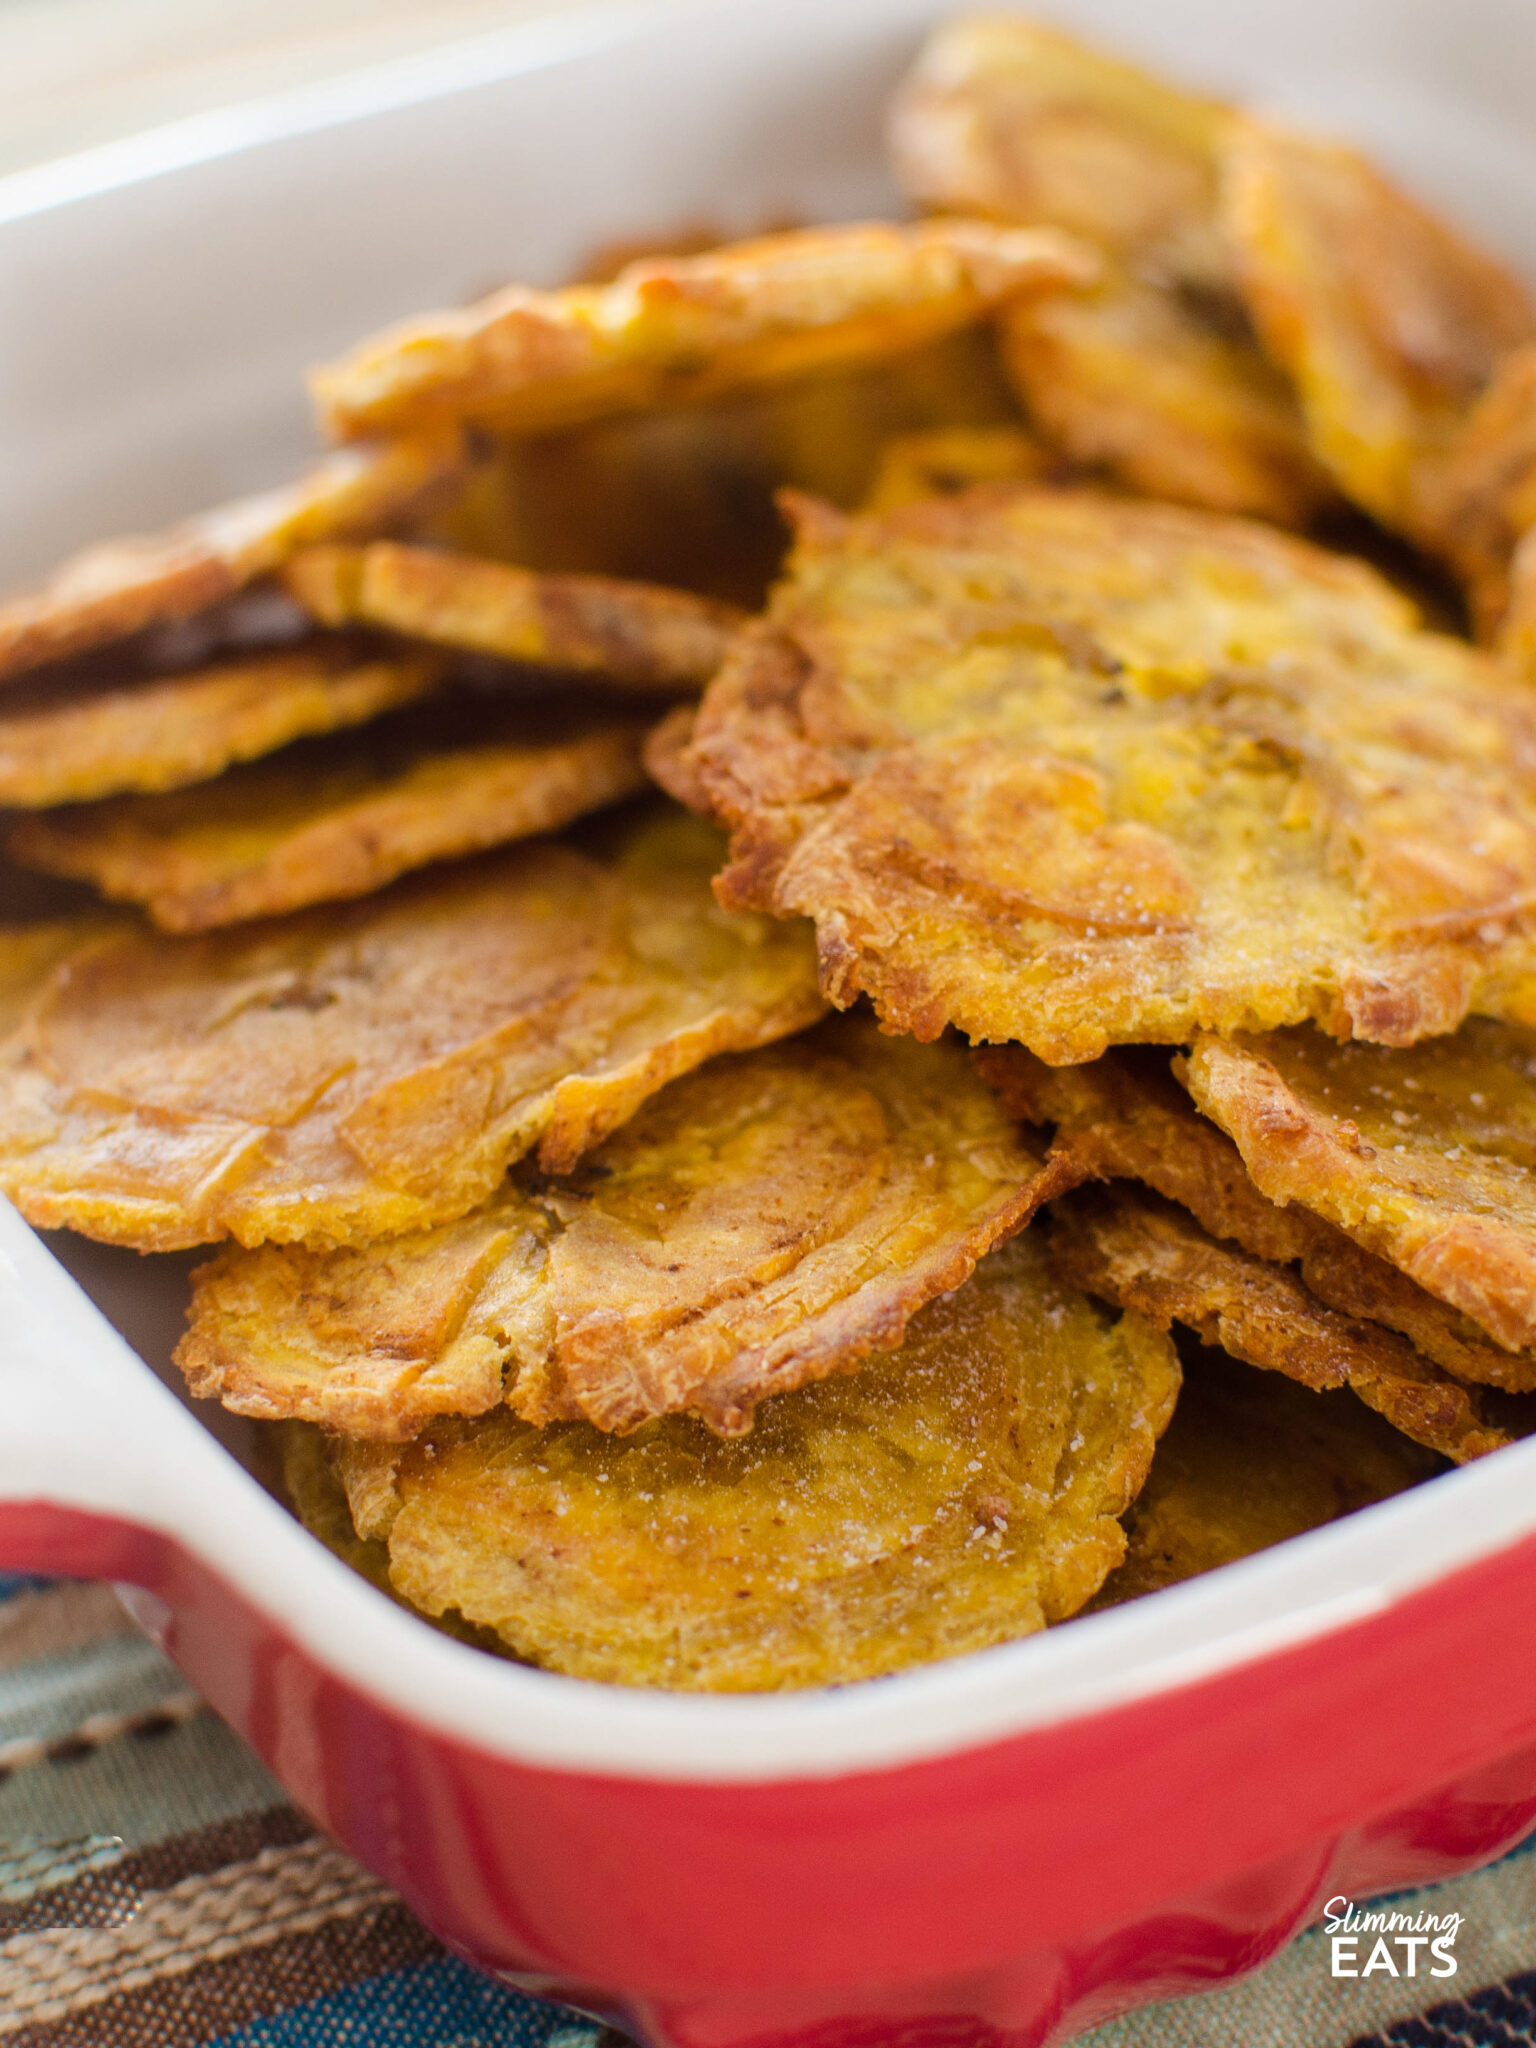 Baked Tostones in a red dish